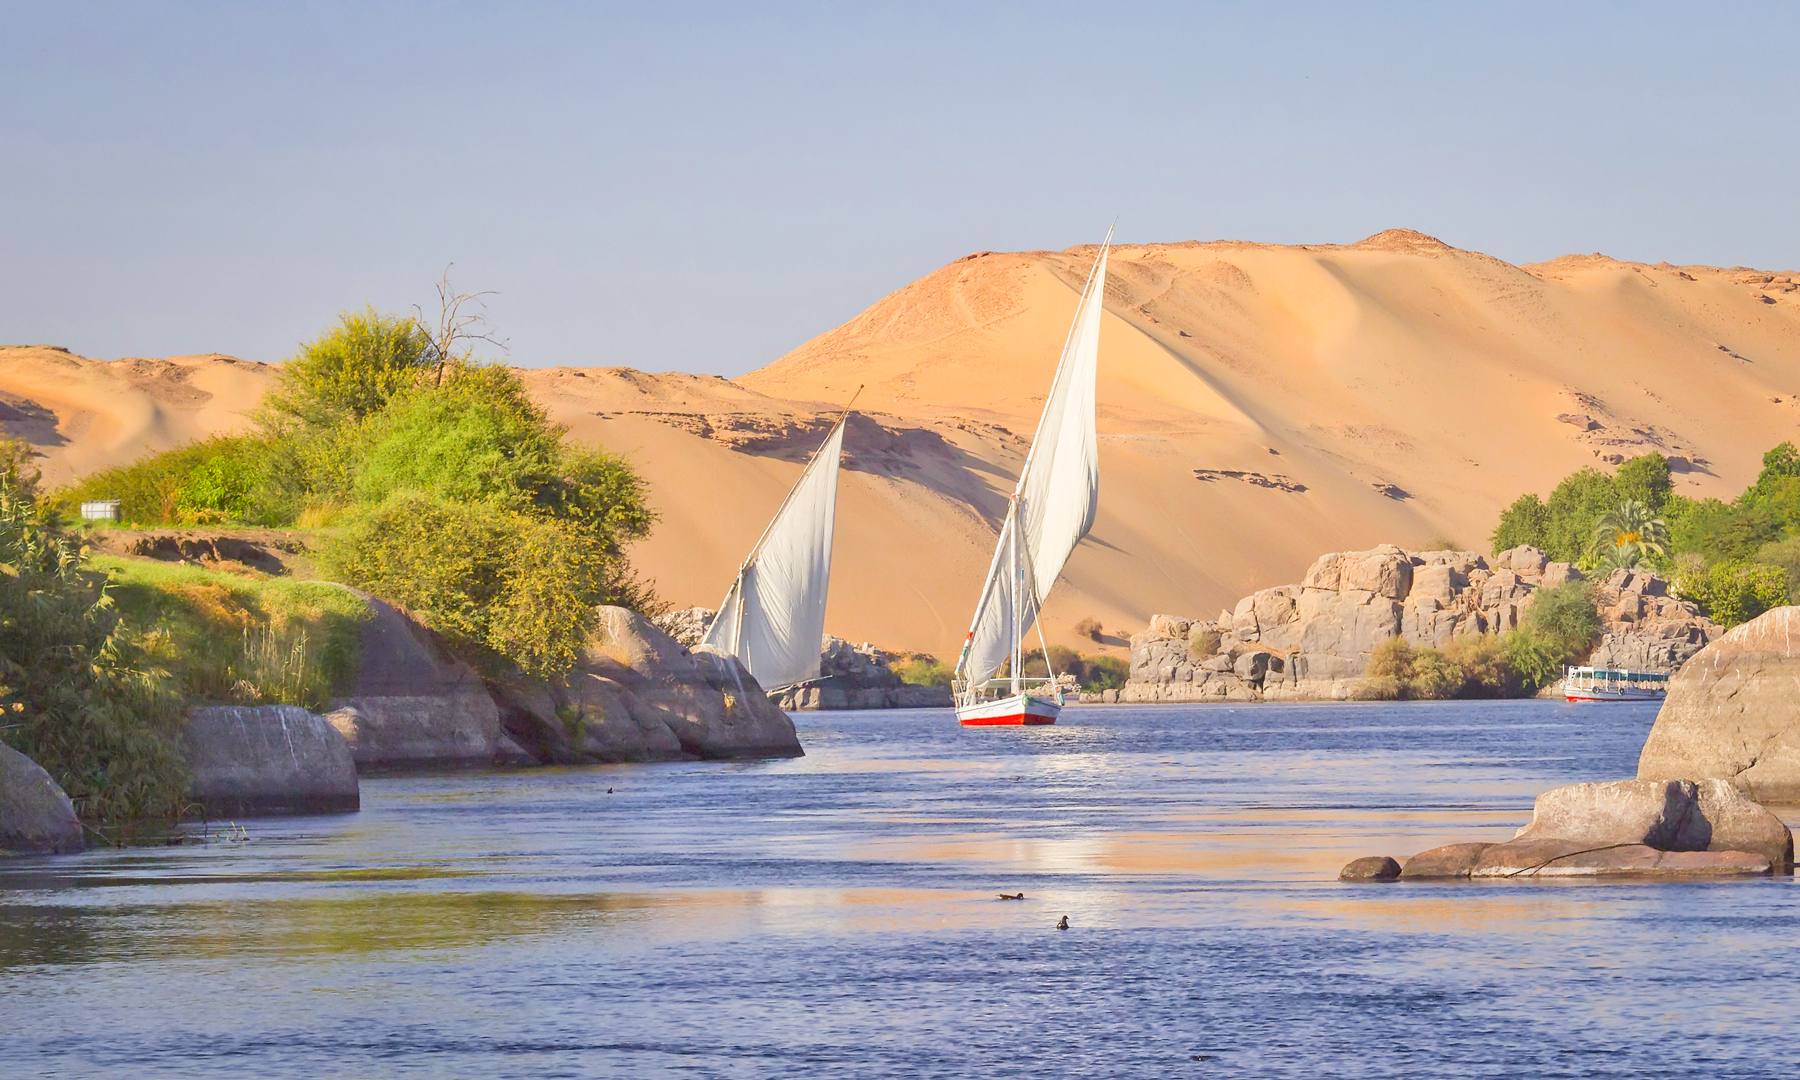 The 15 Best Nile Cruises in Egypt Luxury Sailing from Luxor to Aswan